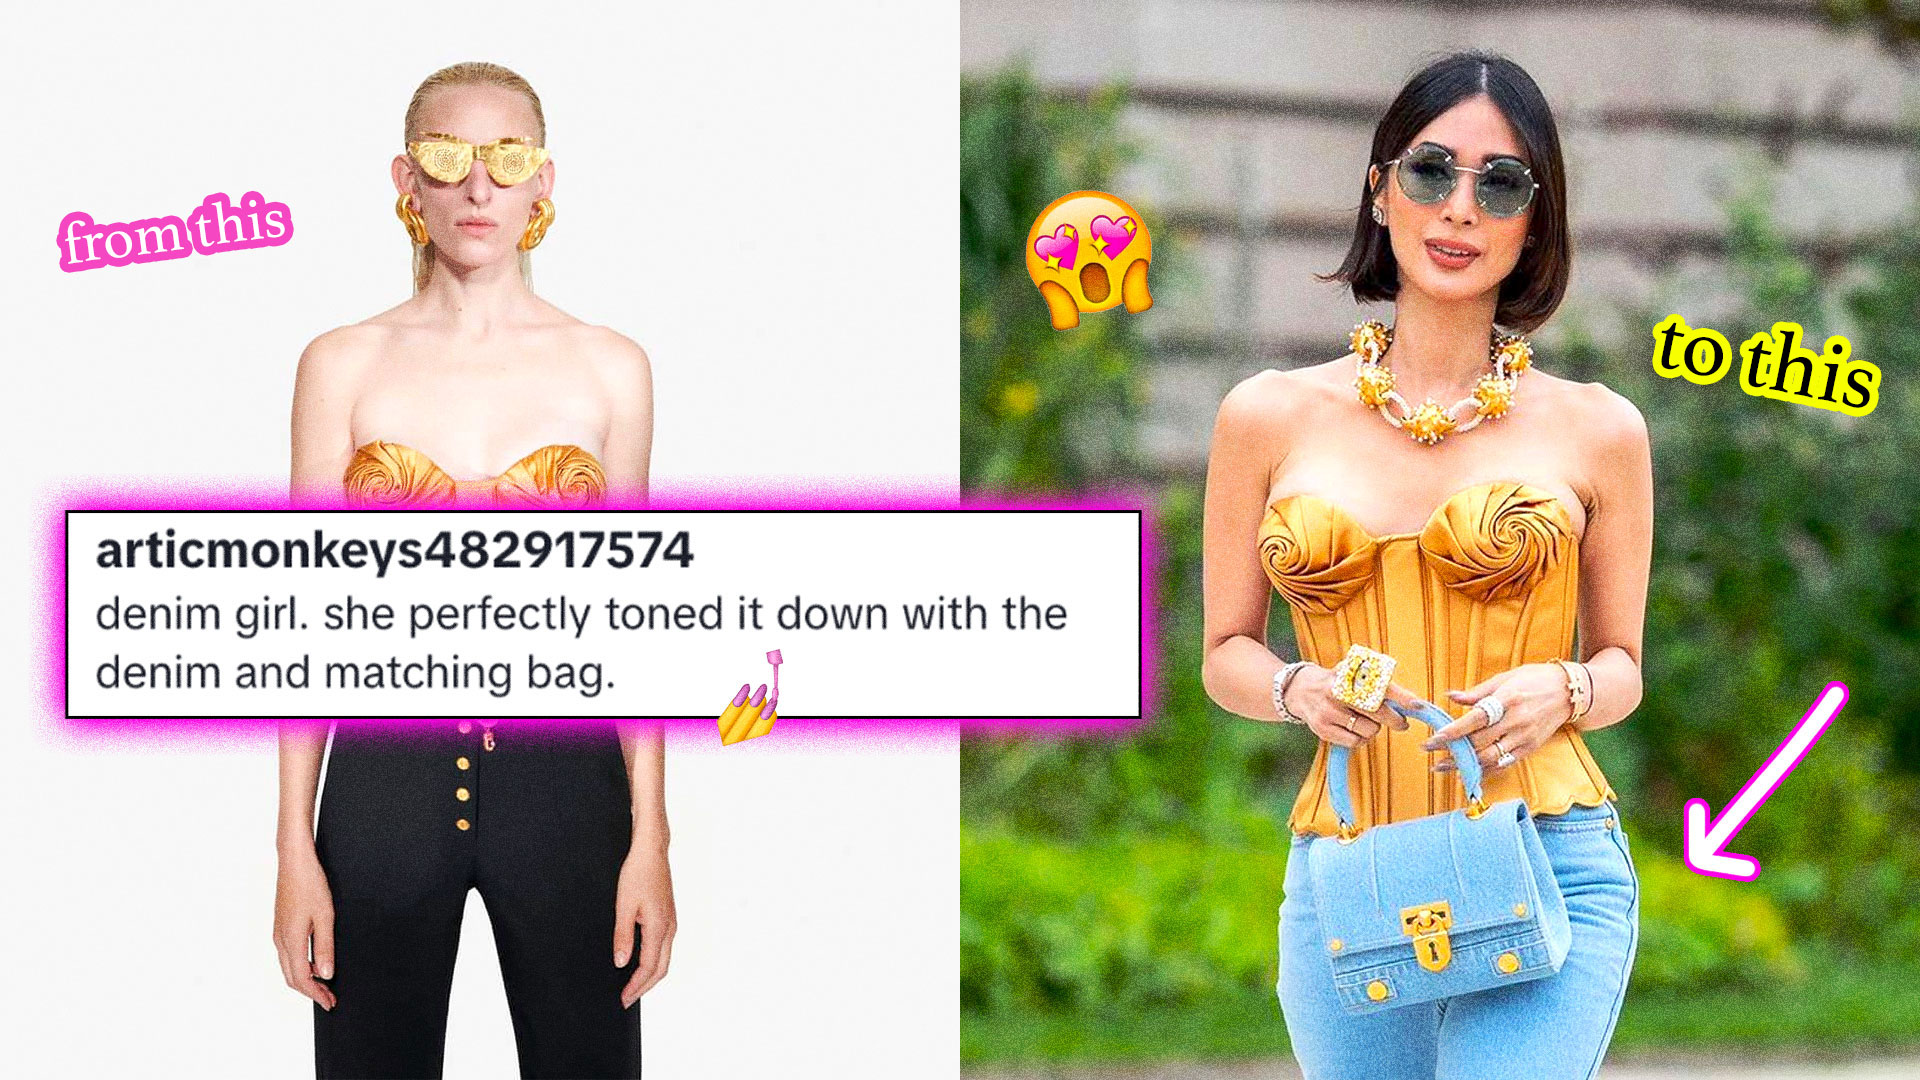 Look: Real Story Behind Heart Evangelista's Iconic Ysl Sunglasses